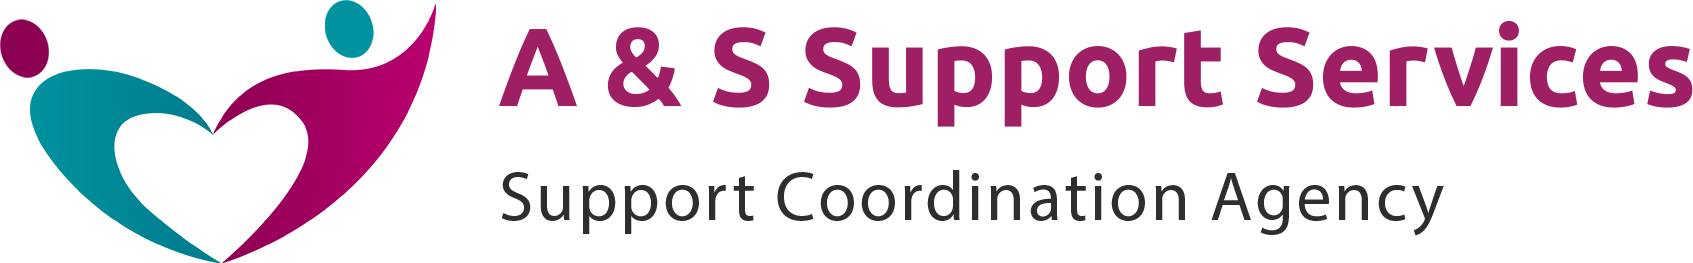 A & S Support Services